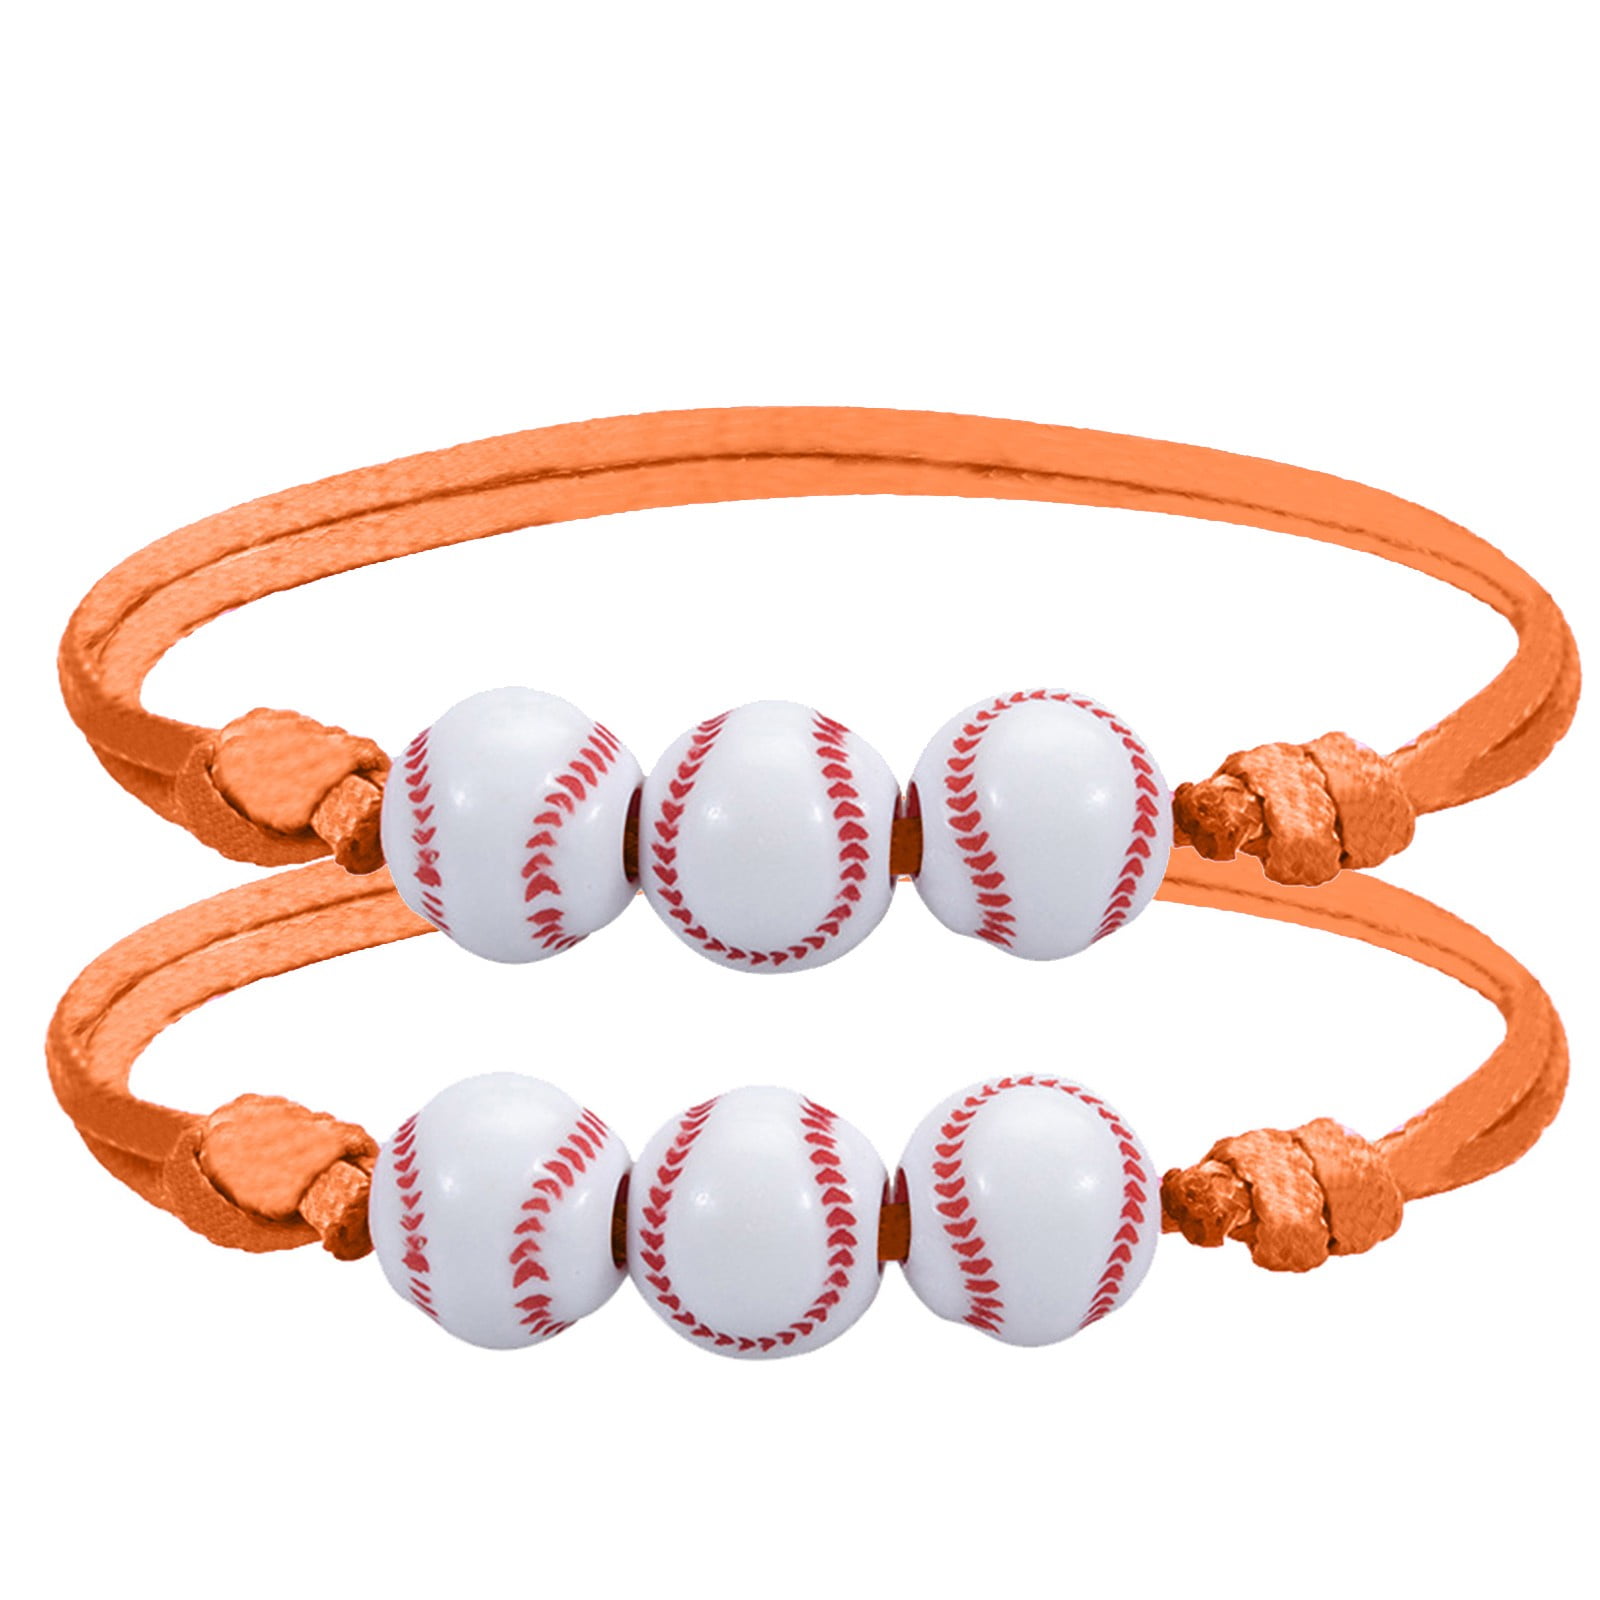 TEHAUX 100pcs Baseball Beads Decked Accessories Round Beads Exercise  Accessories Handmade Decorative Accessories Sport Accessories Circle Beads  Loose